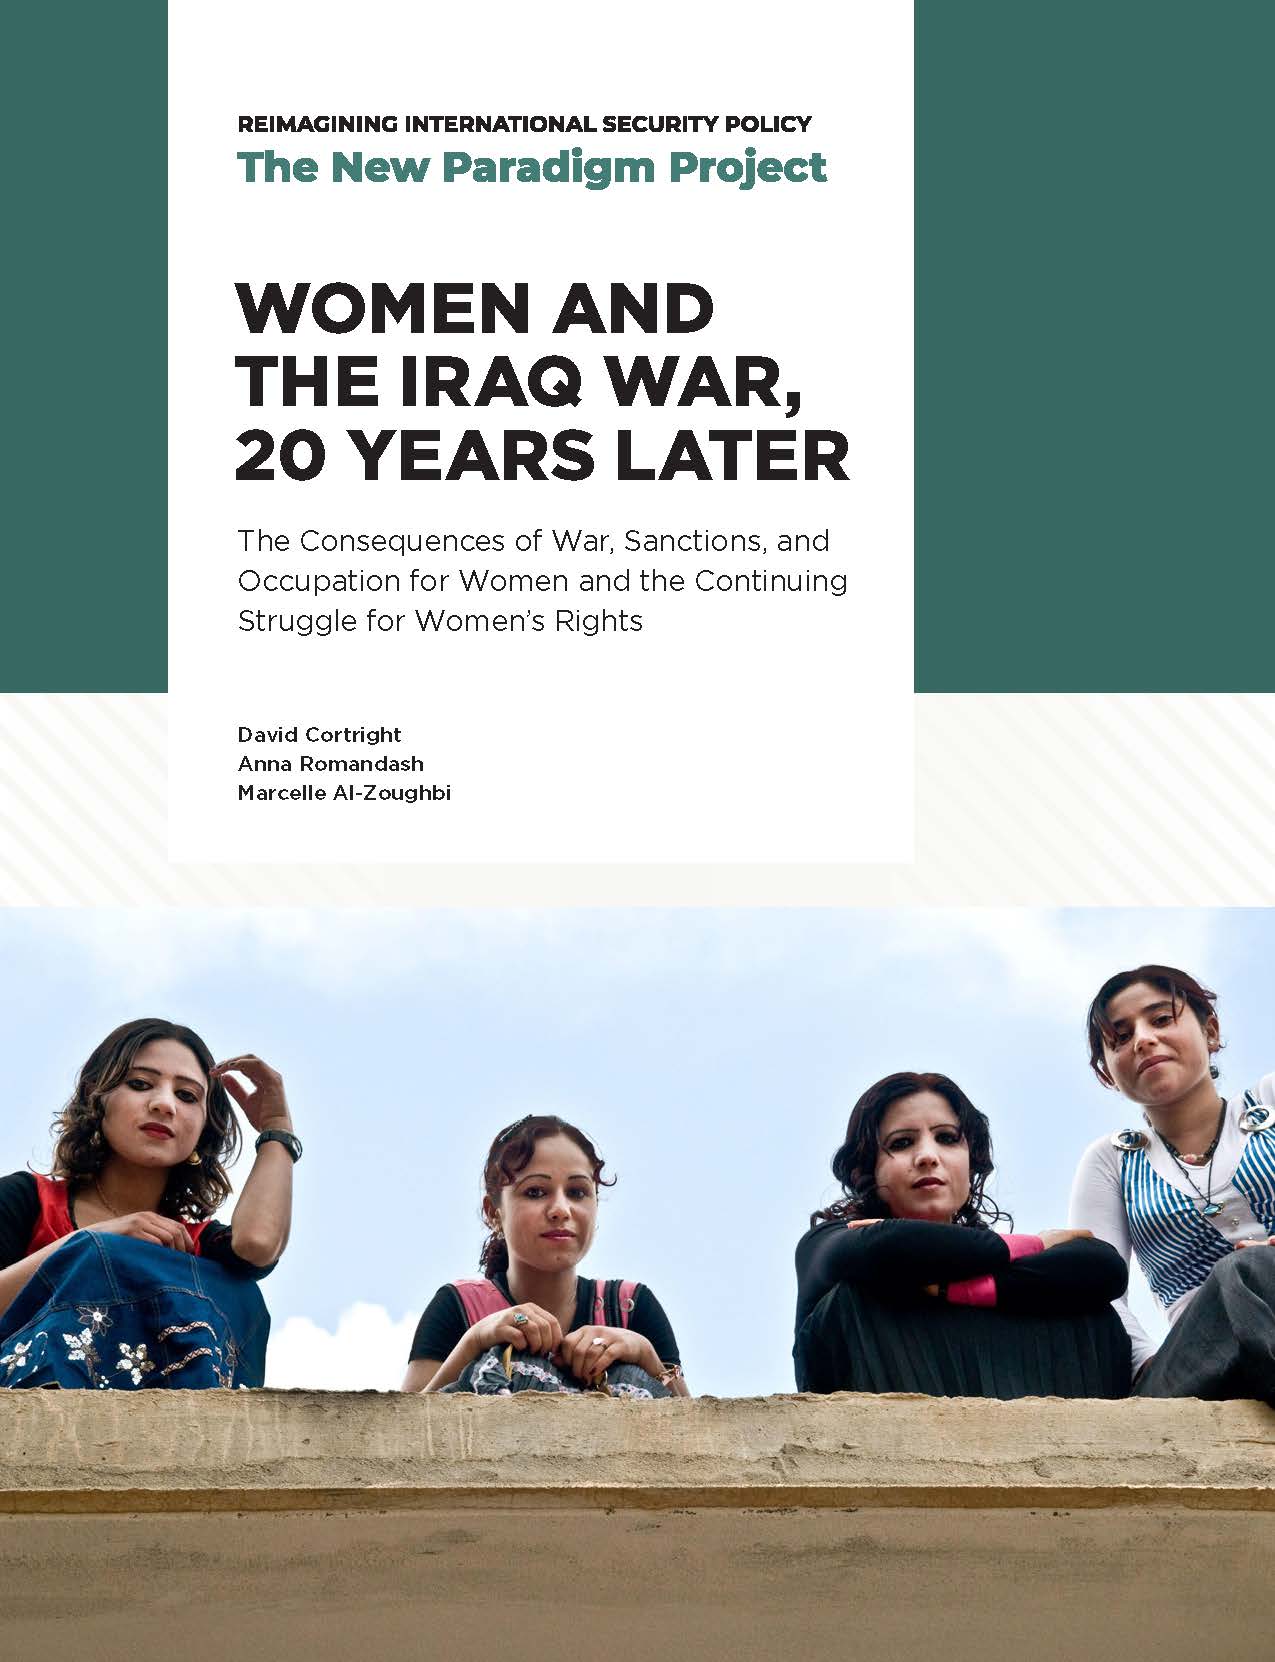 Women and the Iraq War, 20 Years Later: The Consequences of War, Sanctions, and Occupation for Women and the Continuing Struggle for Women’s Rights